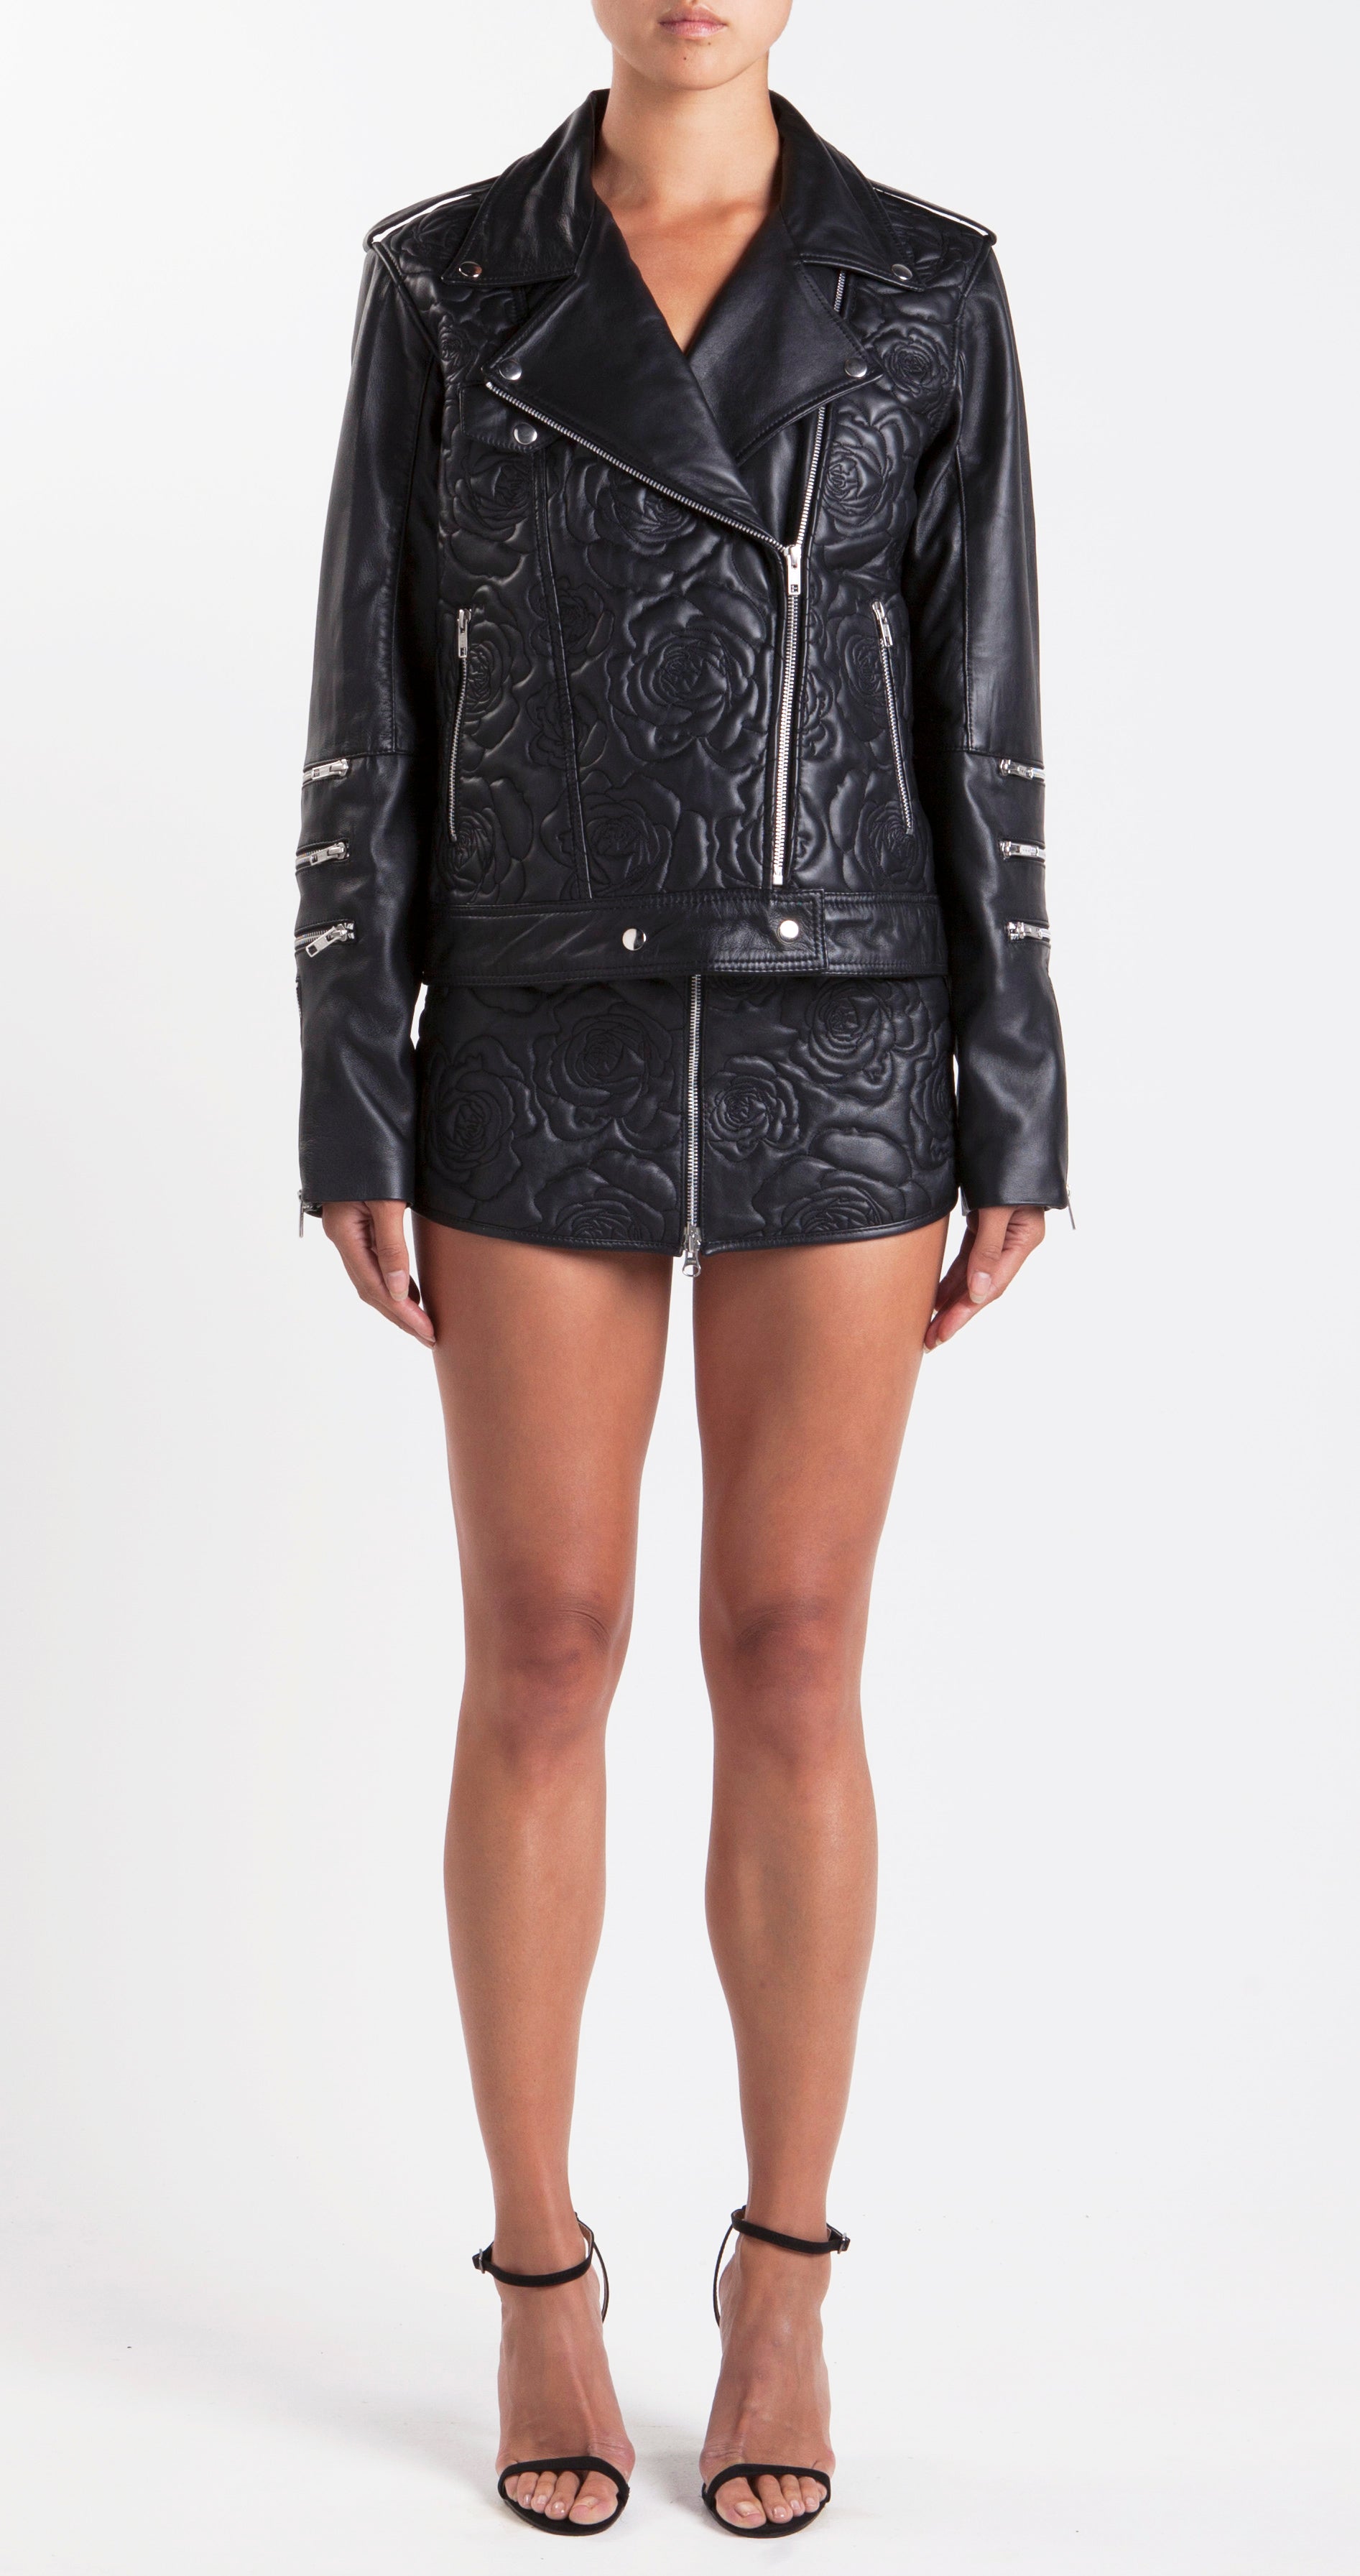 Roses In Silver Vases Embroidered Leather Jacket On Body